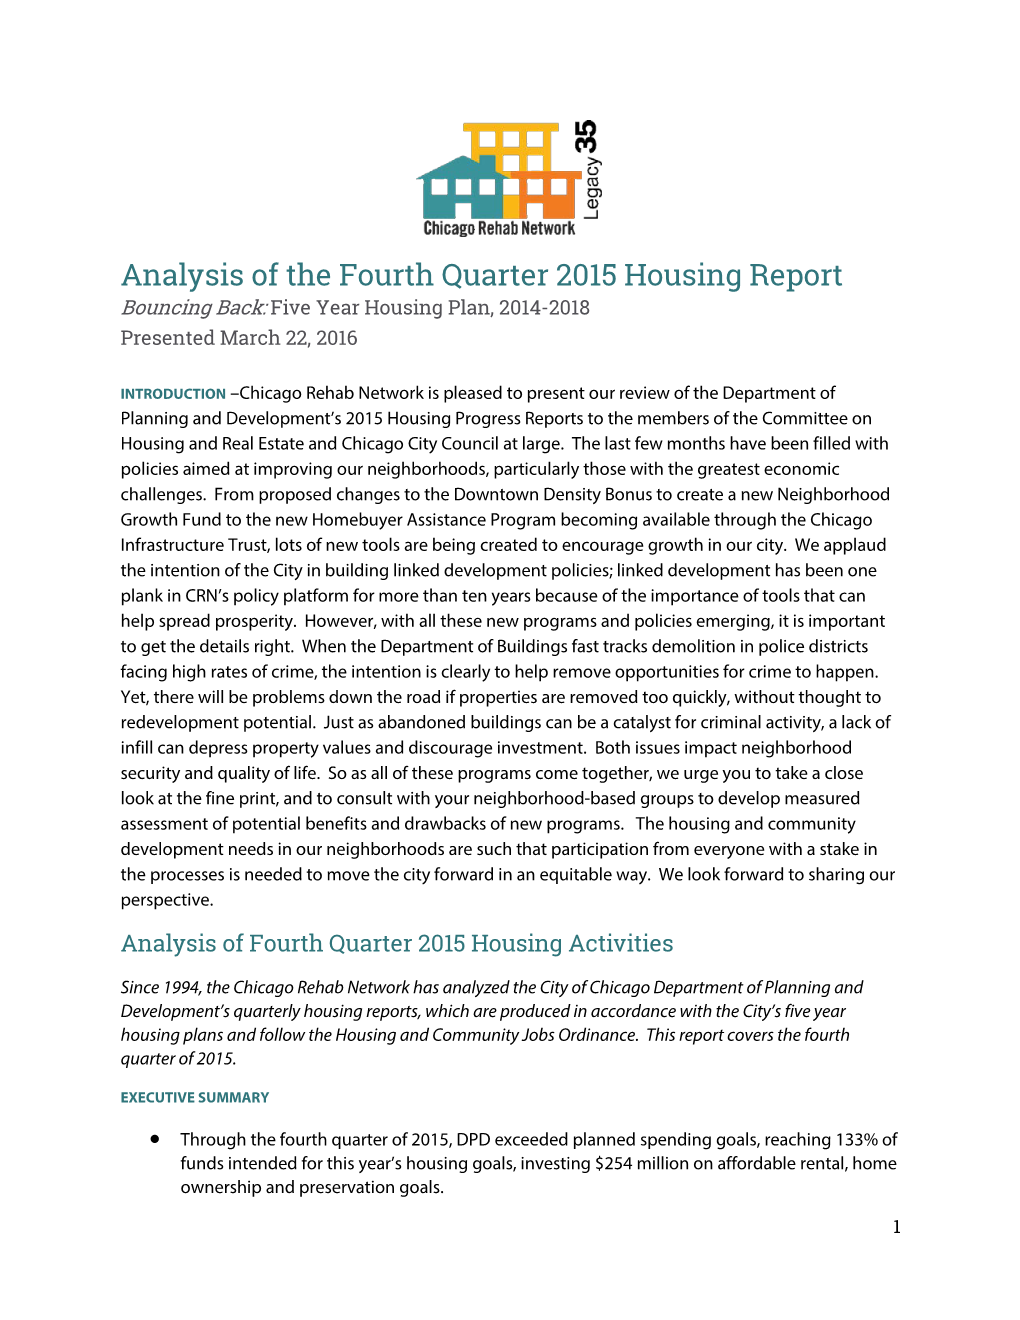 Analysis of the Fourth Quarter 2015 Housing Report Bouncing Back: Five Year Housing Plan, 2014-2018 Presented March 22, 2016